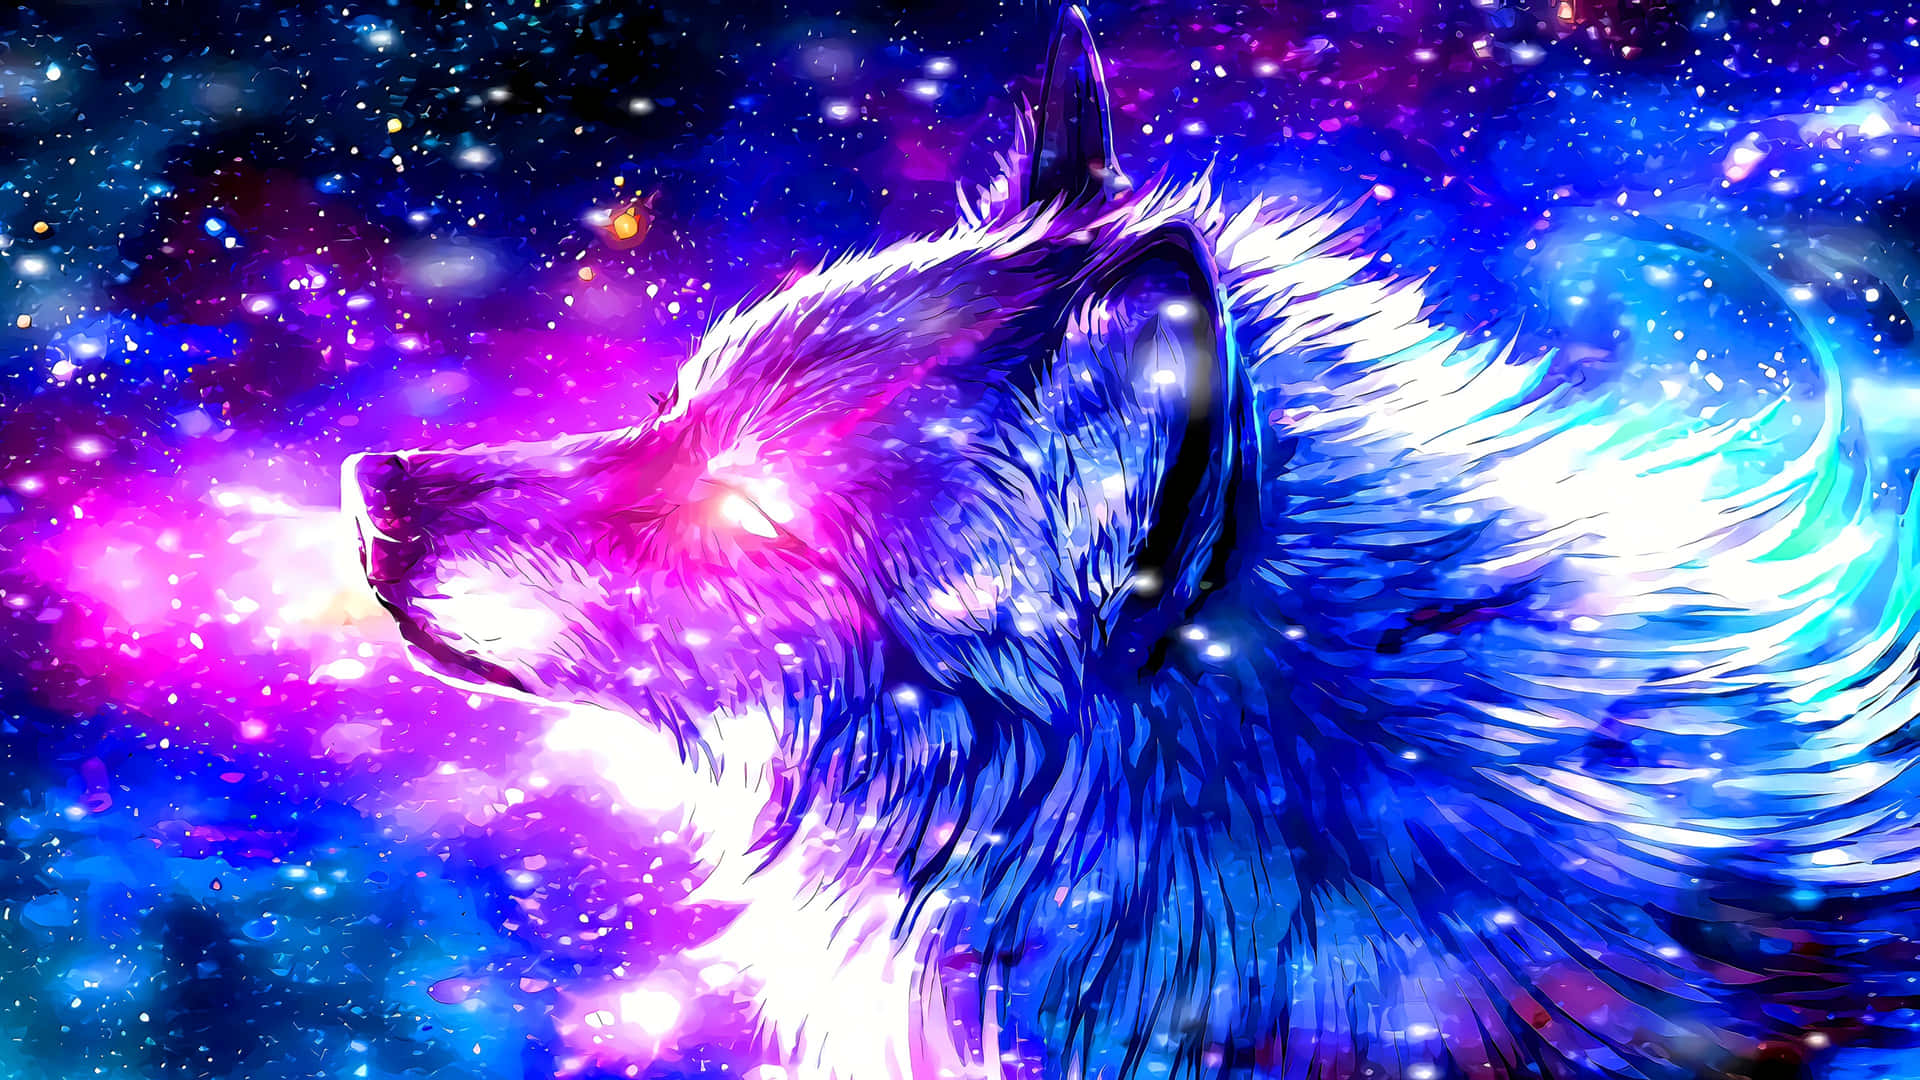 "An awe-inspiring wolf with a cool anime-inspired twist!" Wallpaper